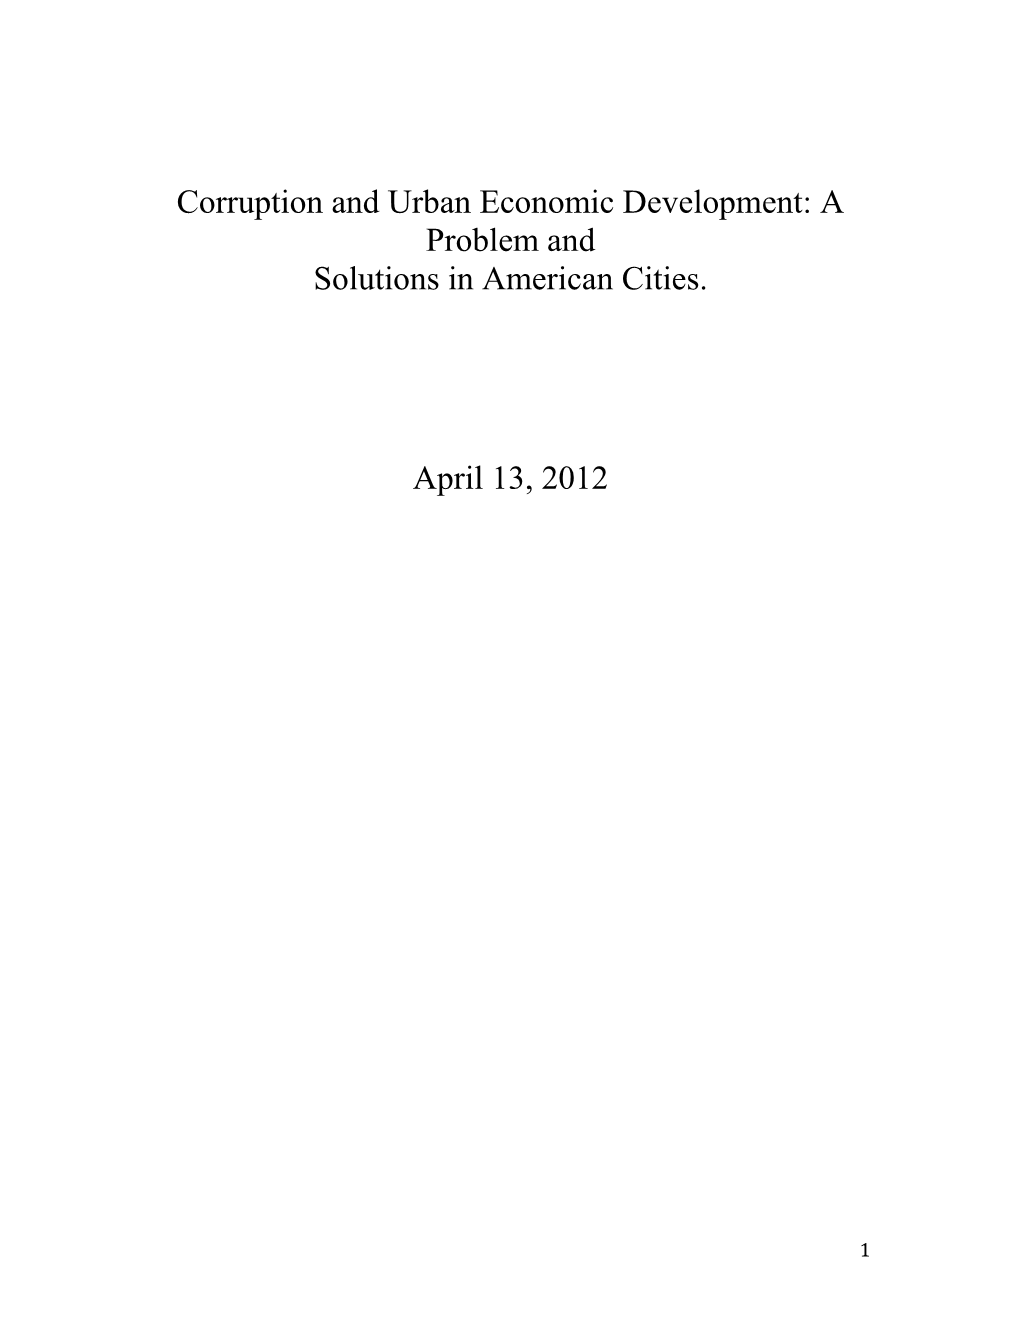 Corruption and Urban Economic Development: a Problem and Solutions in American Cities